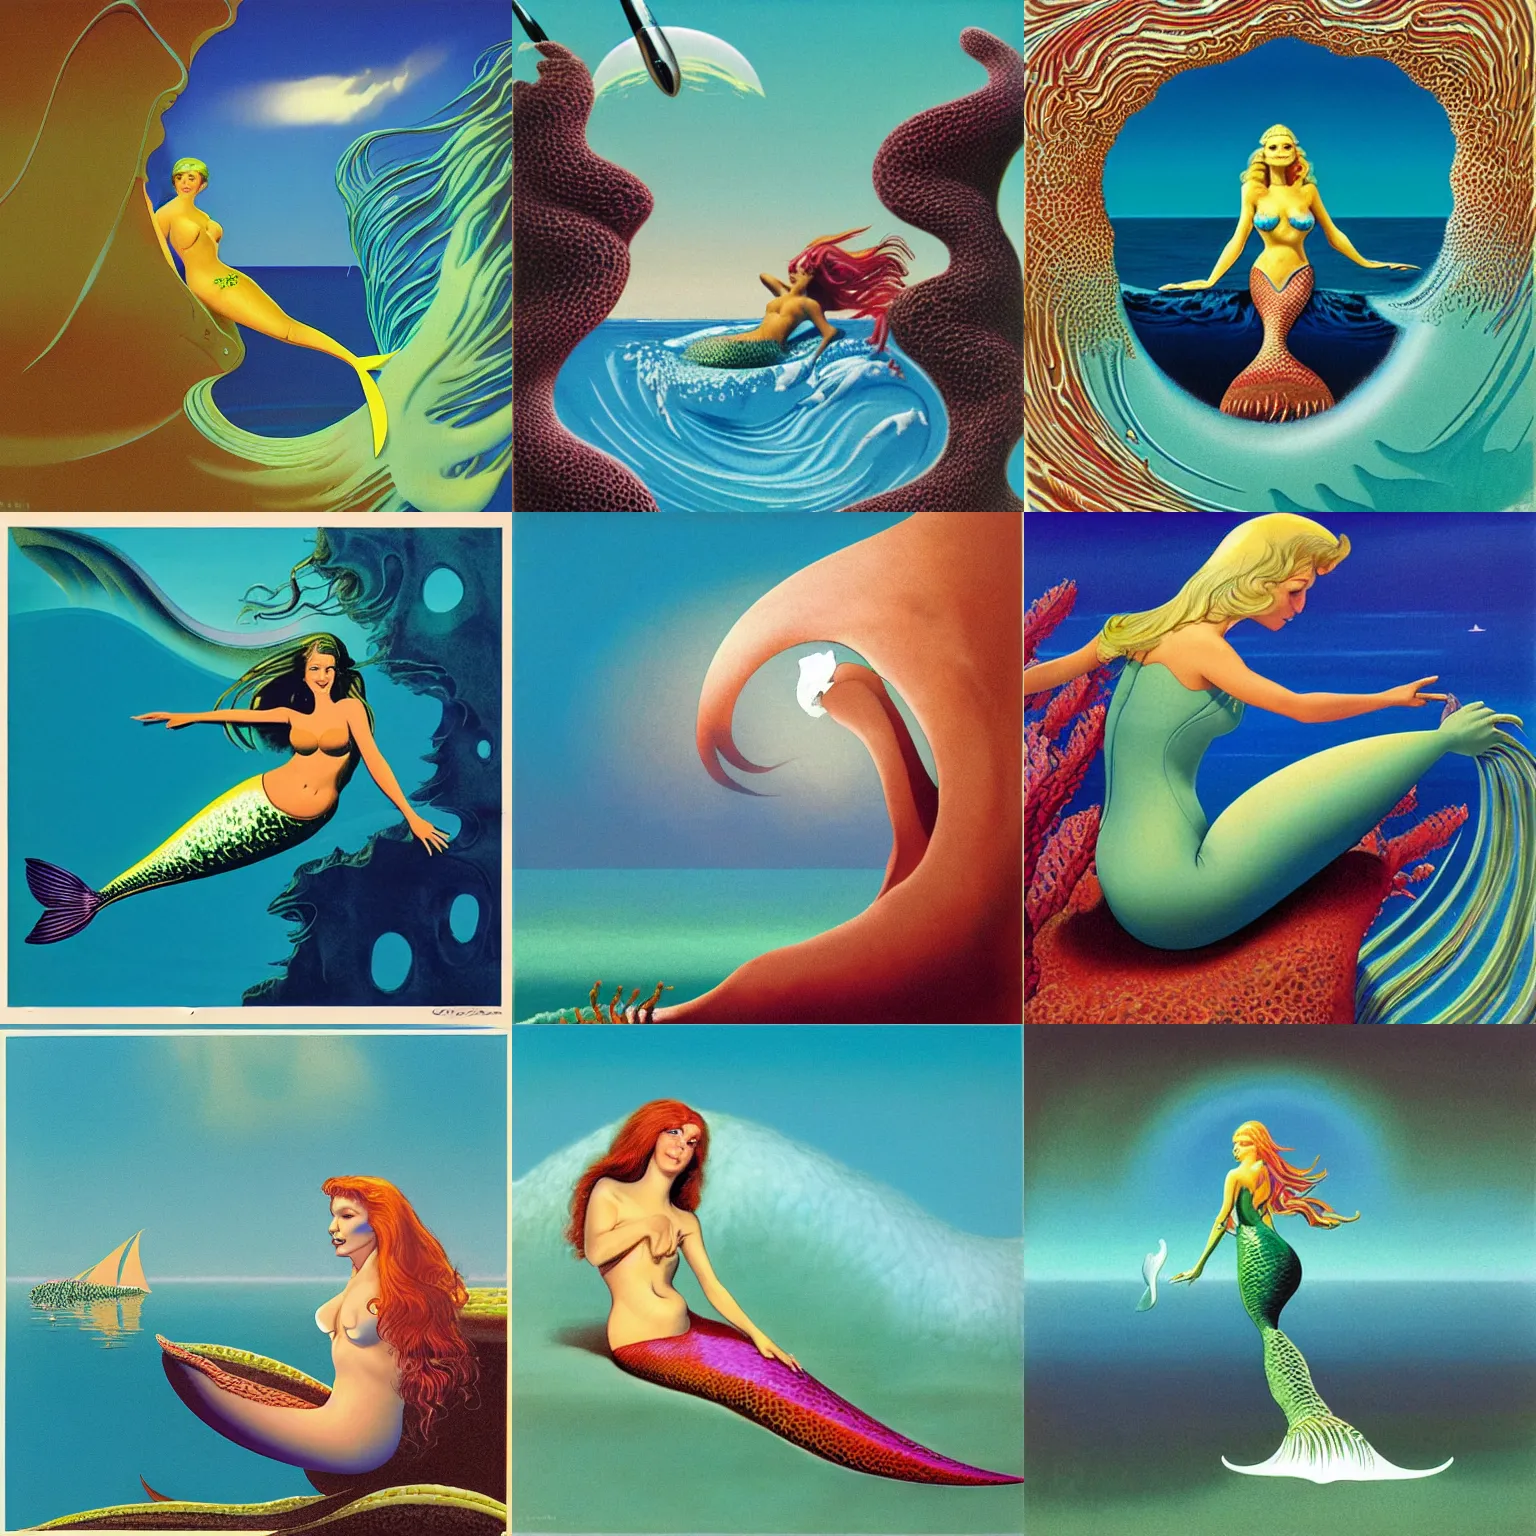 Prompt: Mermaid on a Wave by Roger Dean, Album art, 1970s